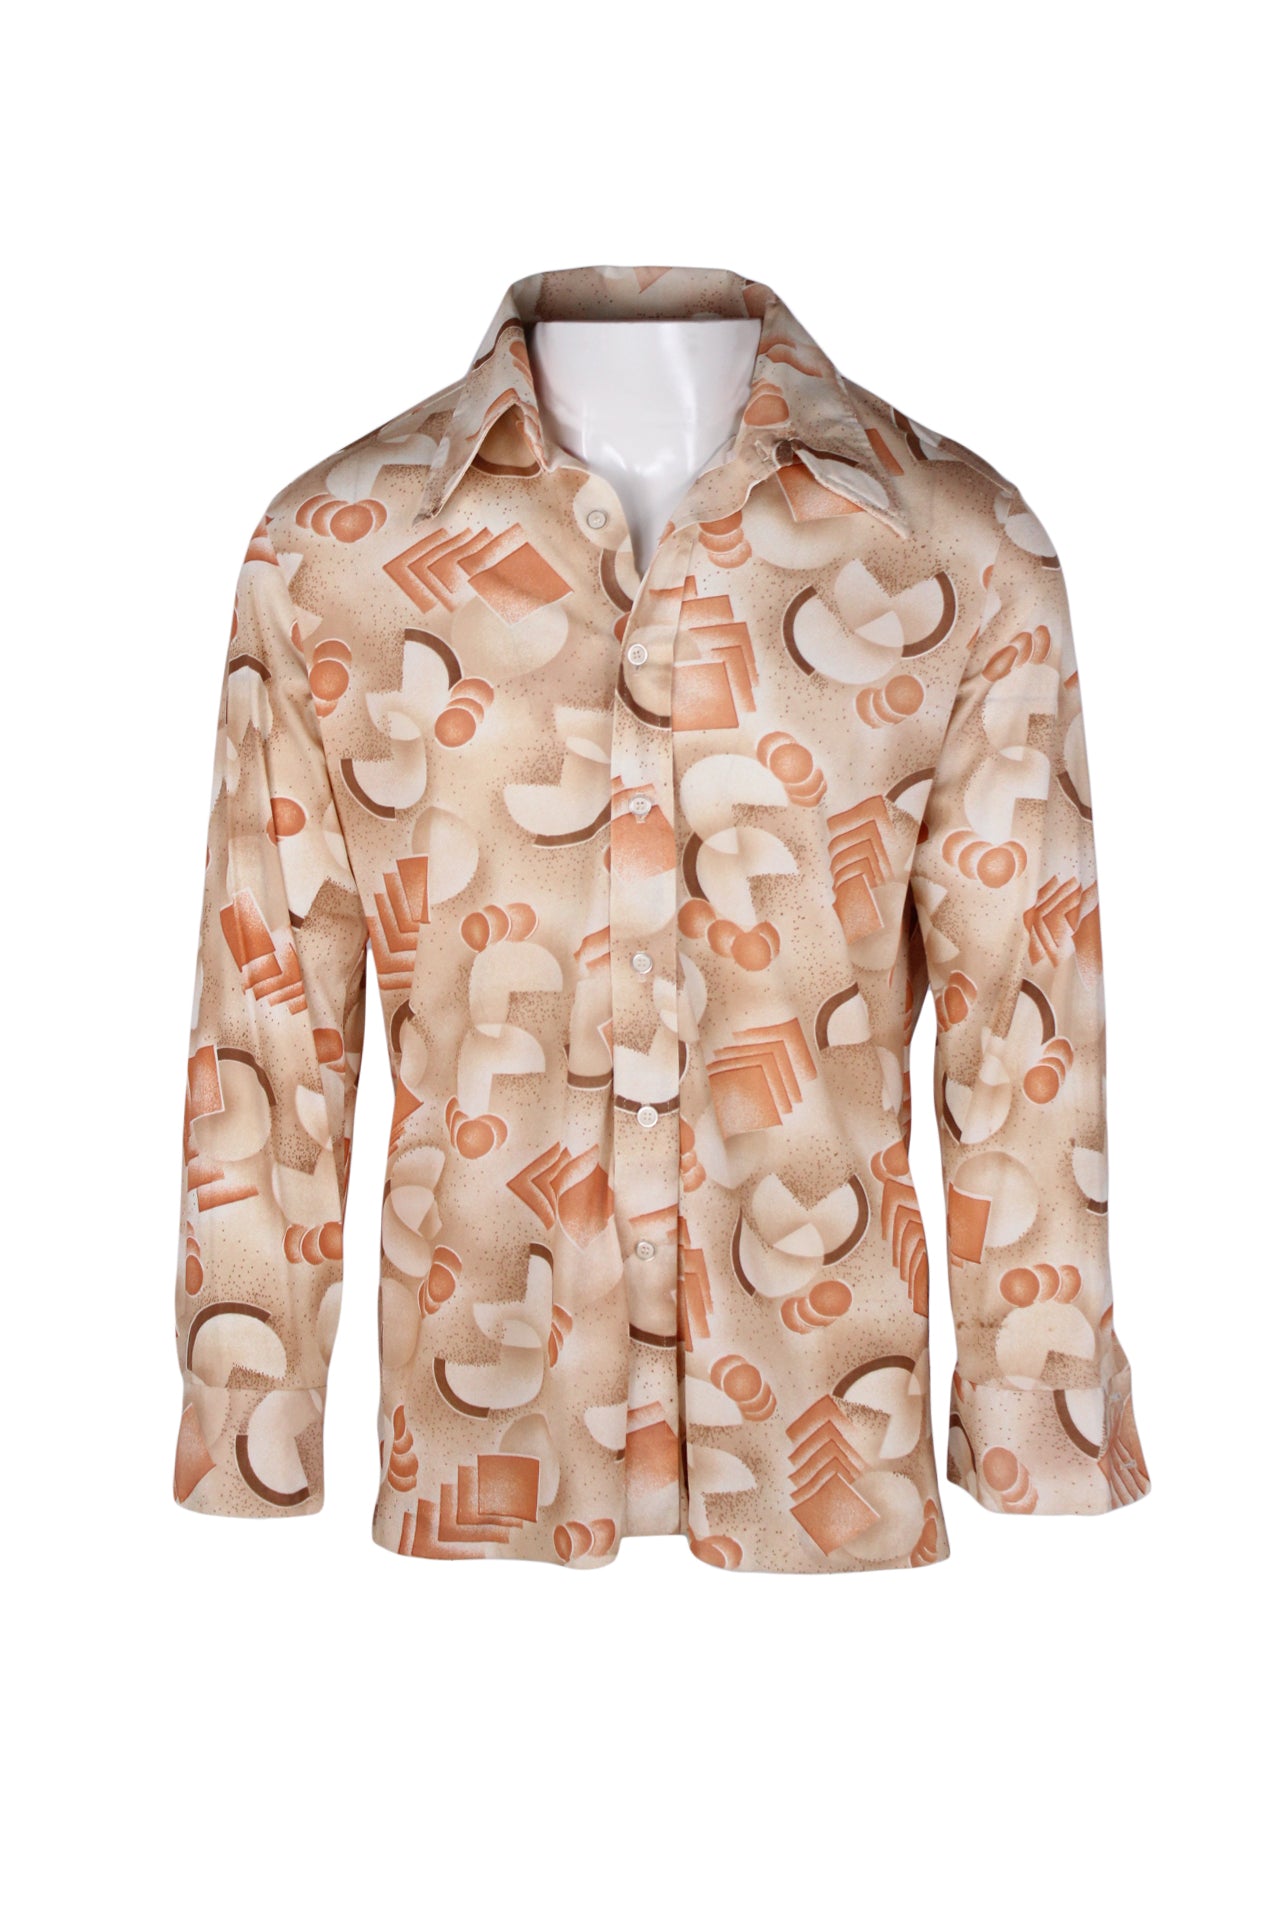 front view of vintage beige/peach/brown long sleeve button up shirt. features abstract pattern throughout, buttons at cuffs, and 70’s style collar.